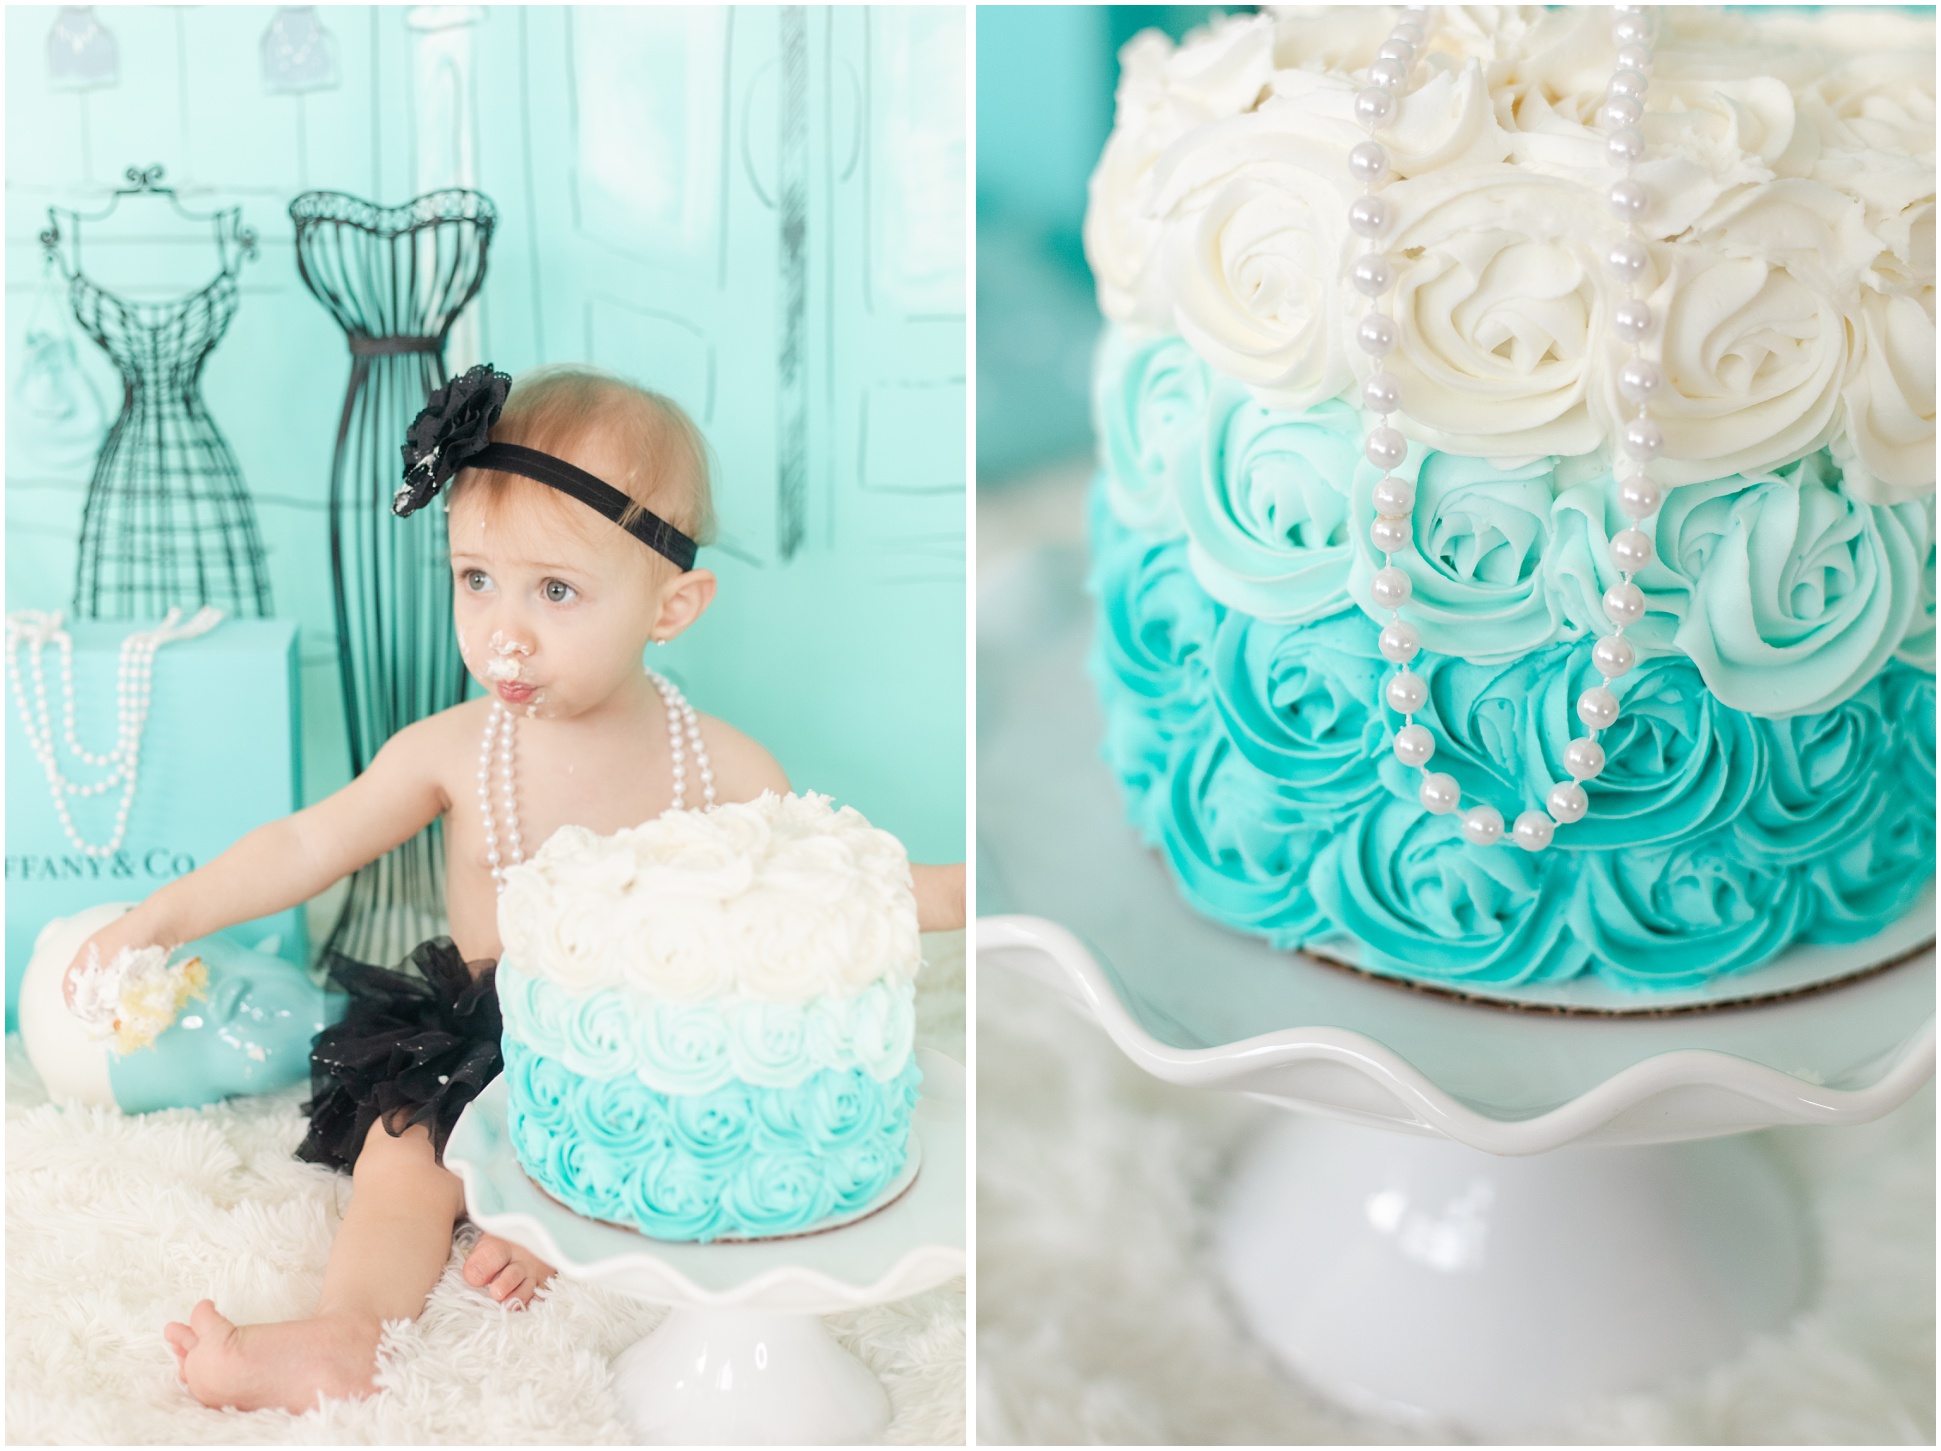 Lily enjoying her Tiffany & Co themed first birthday cake; Ombre blue rose cake with white pearls draped on top